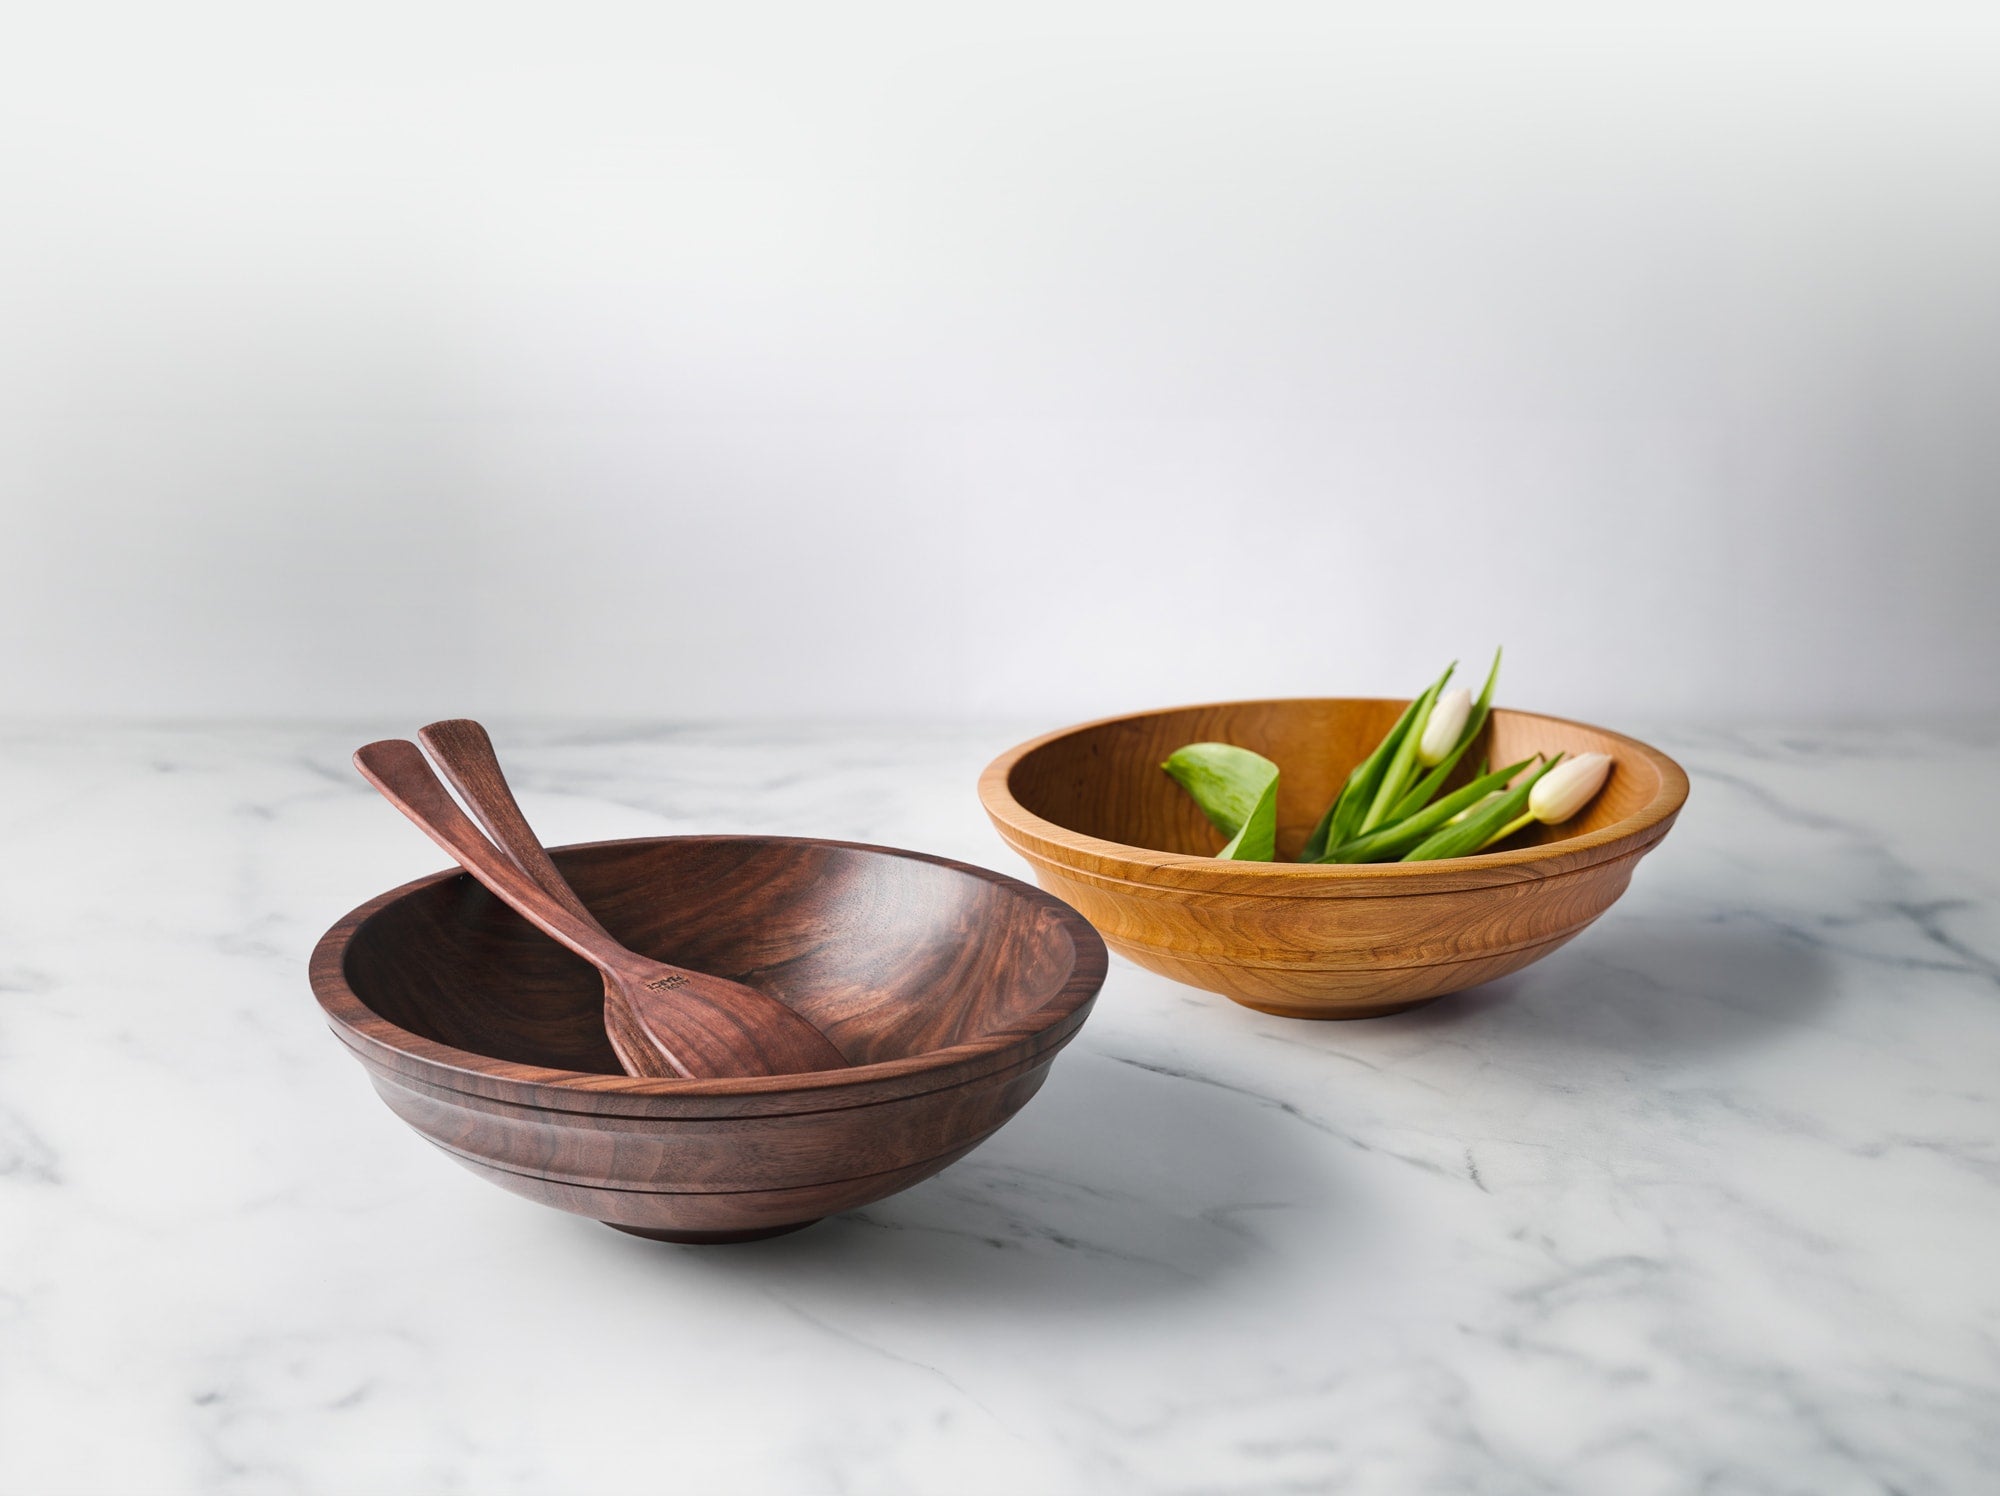 Wooden Bowls from Andrew Pearce Bowls in Hartland Vermont shown in walnut and cherry with wooden salad servers and fresh cut flowers